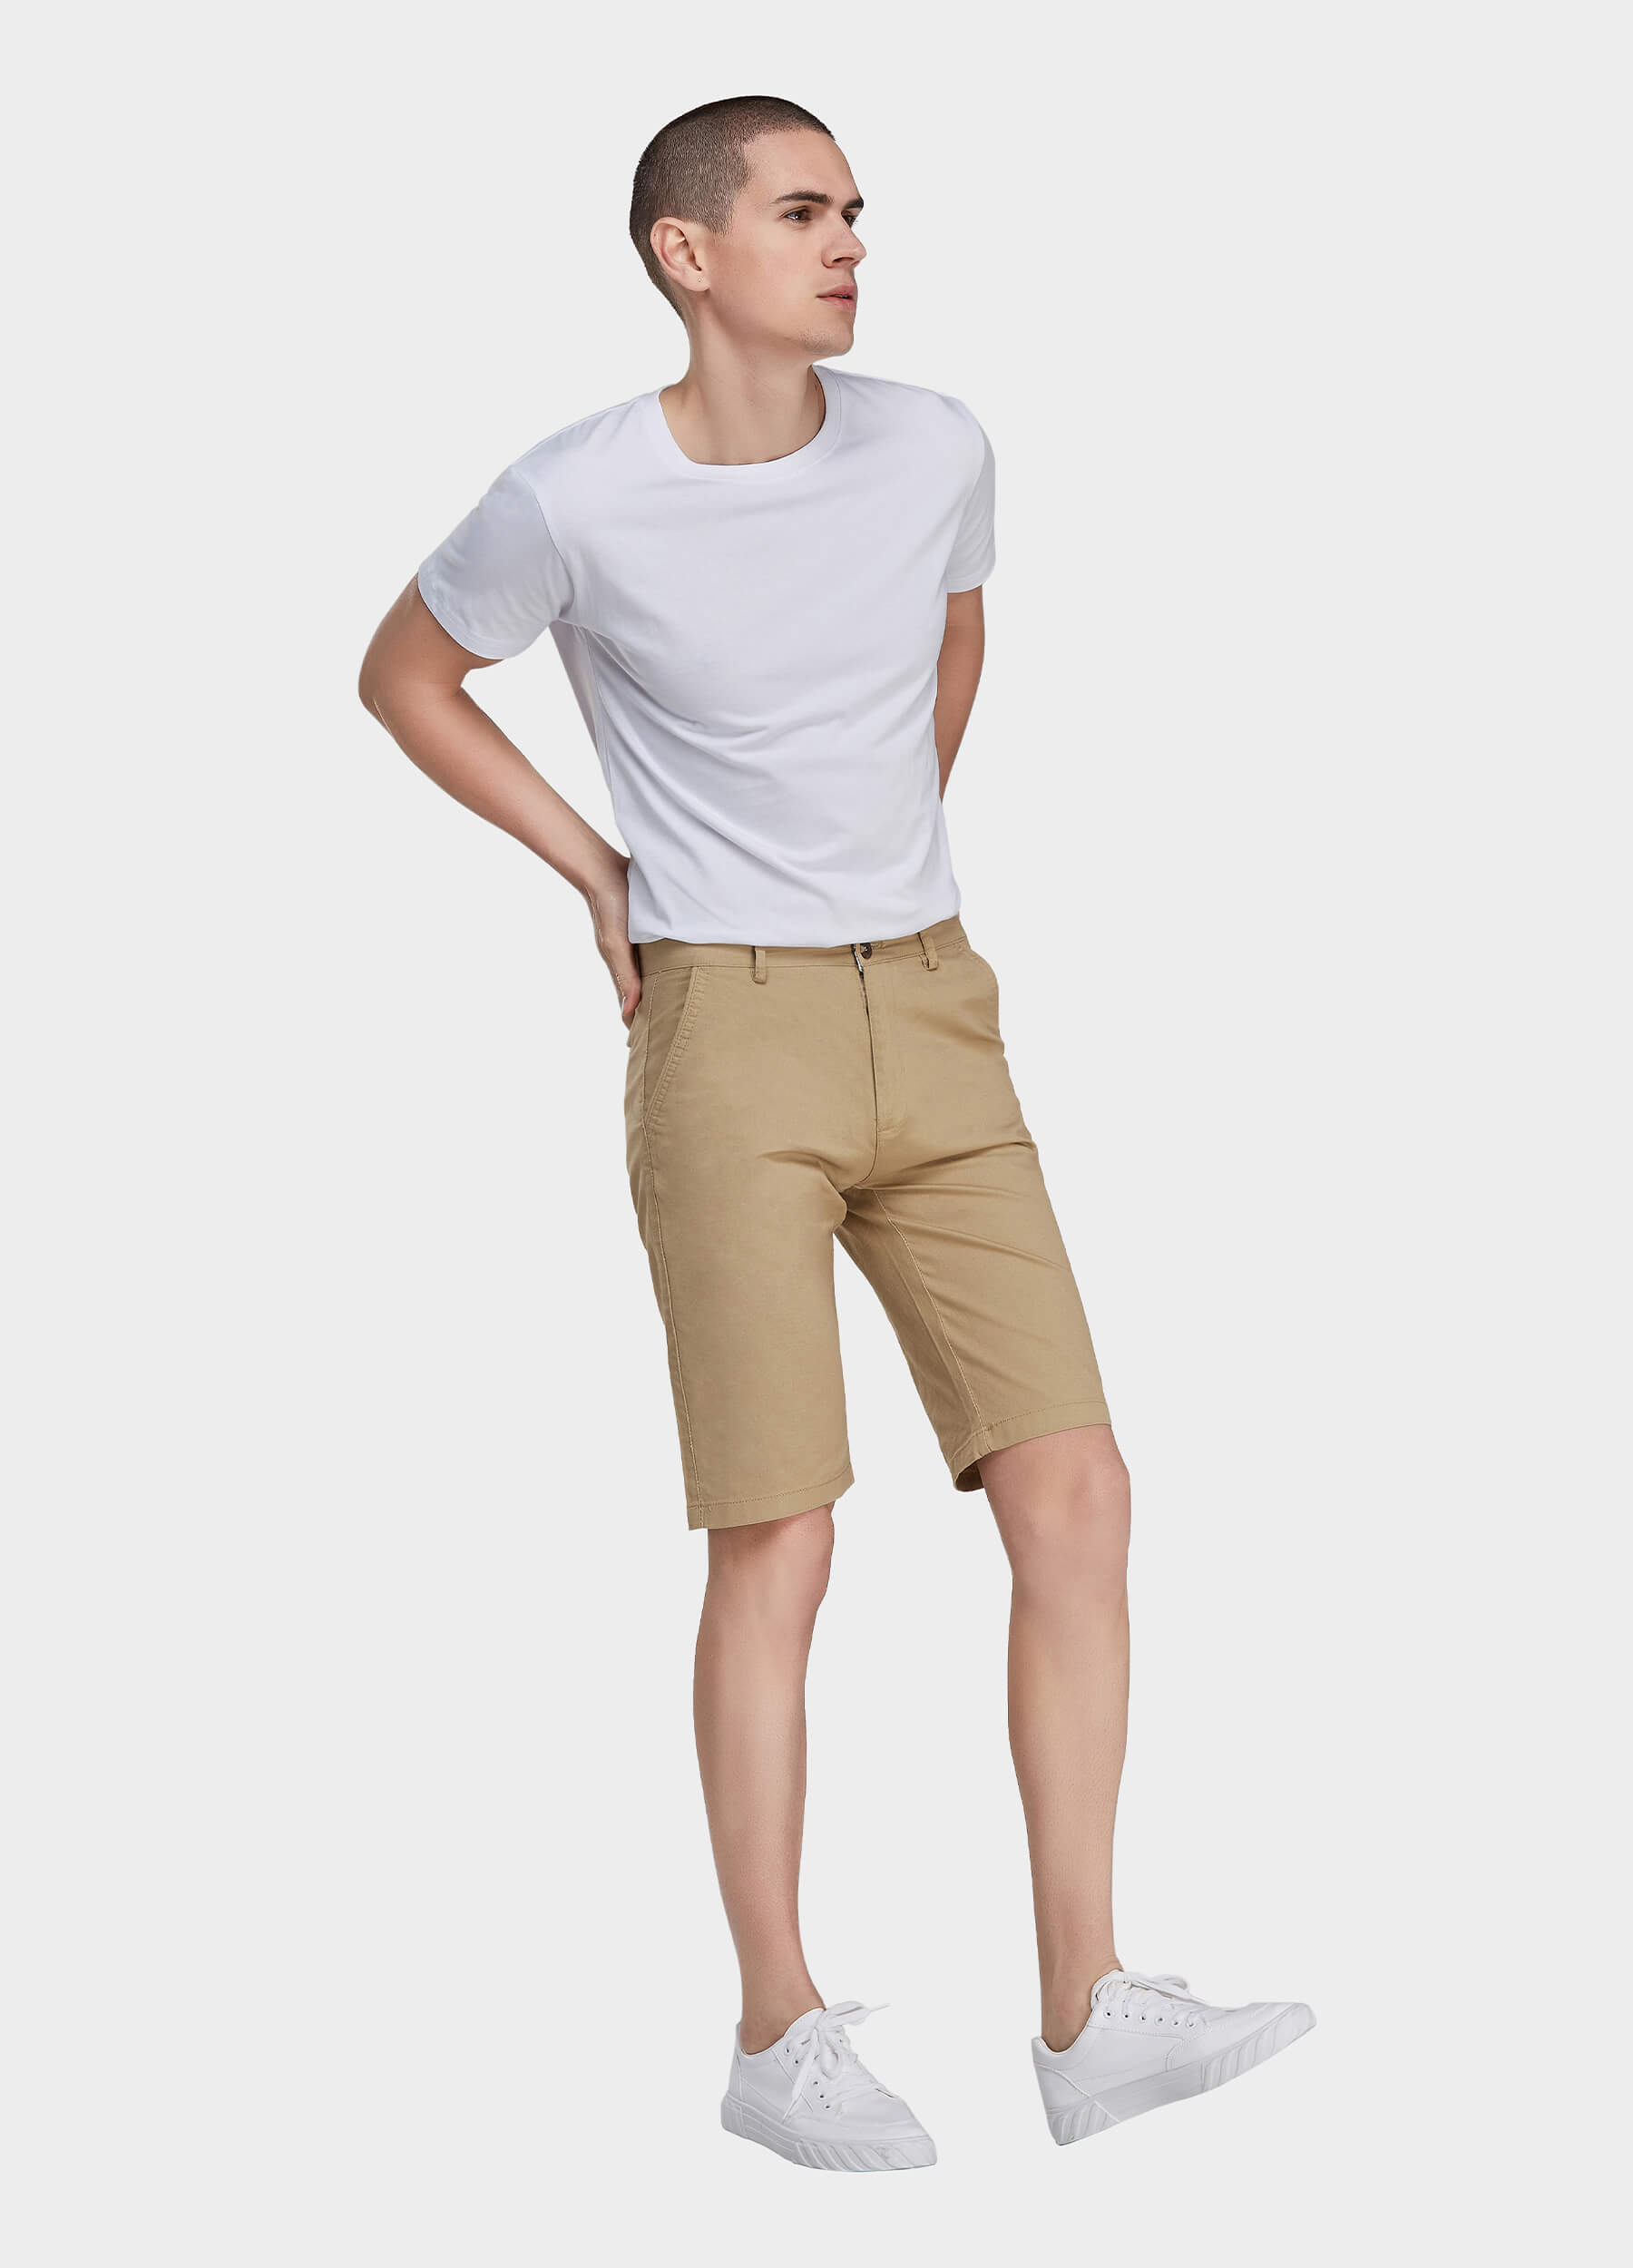 Men's Casual Zipper Fly Button Solid Shorts with Slant Pocket-Khaki side view